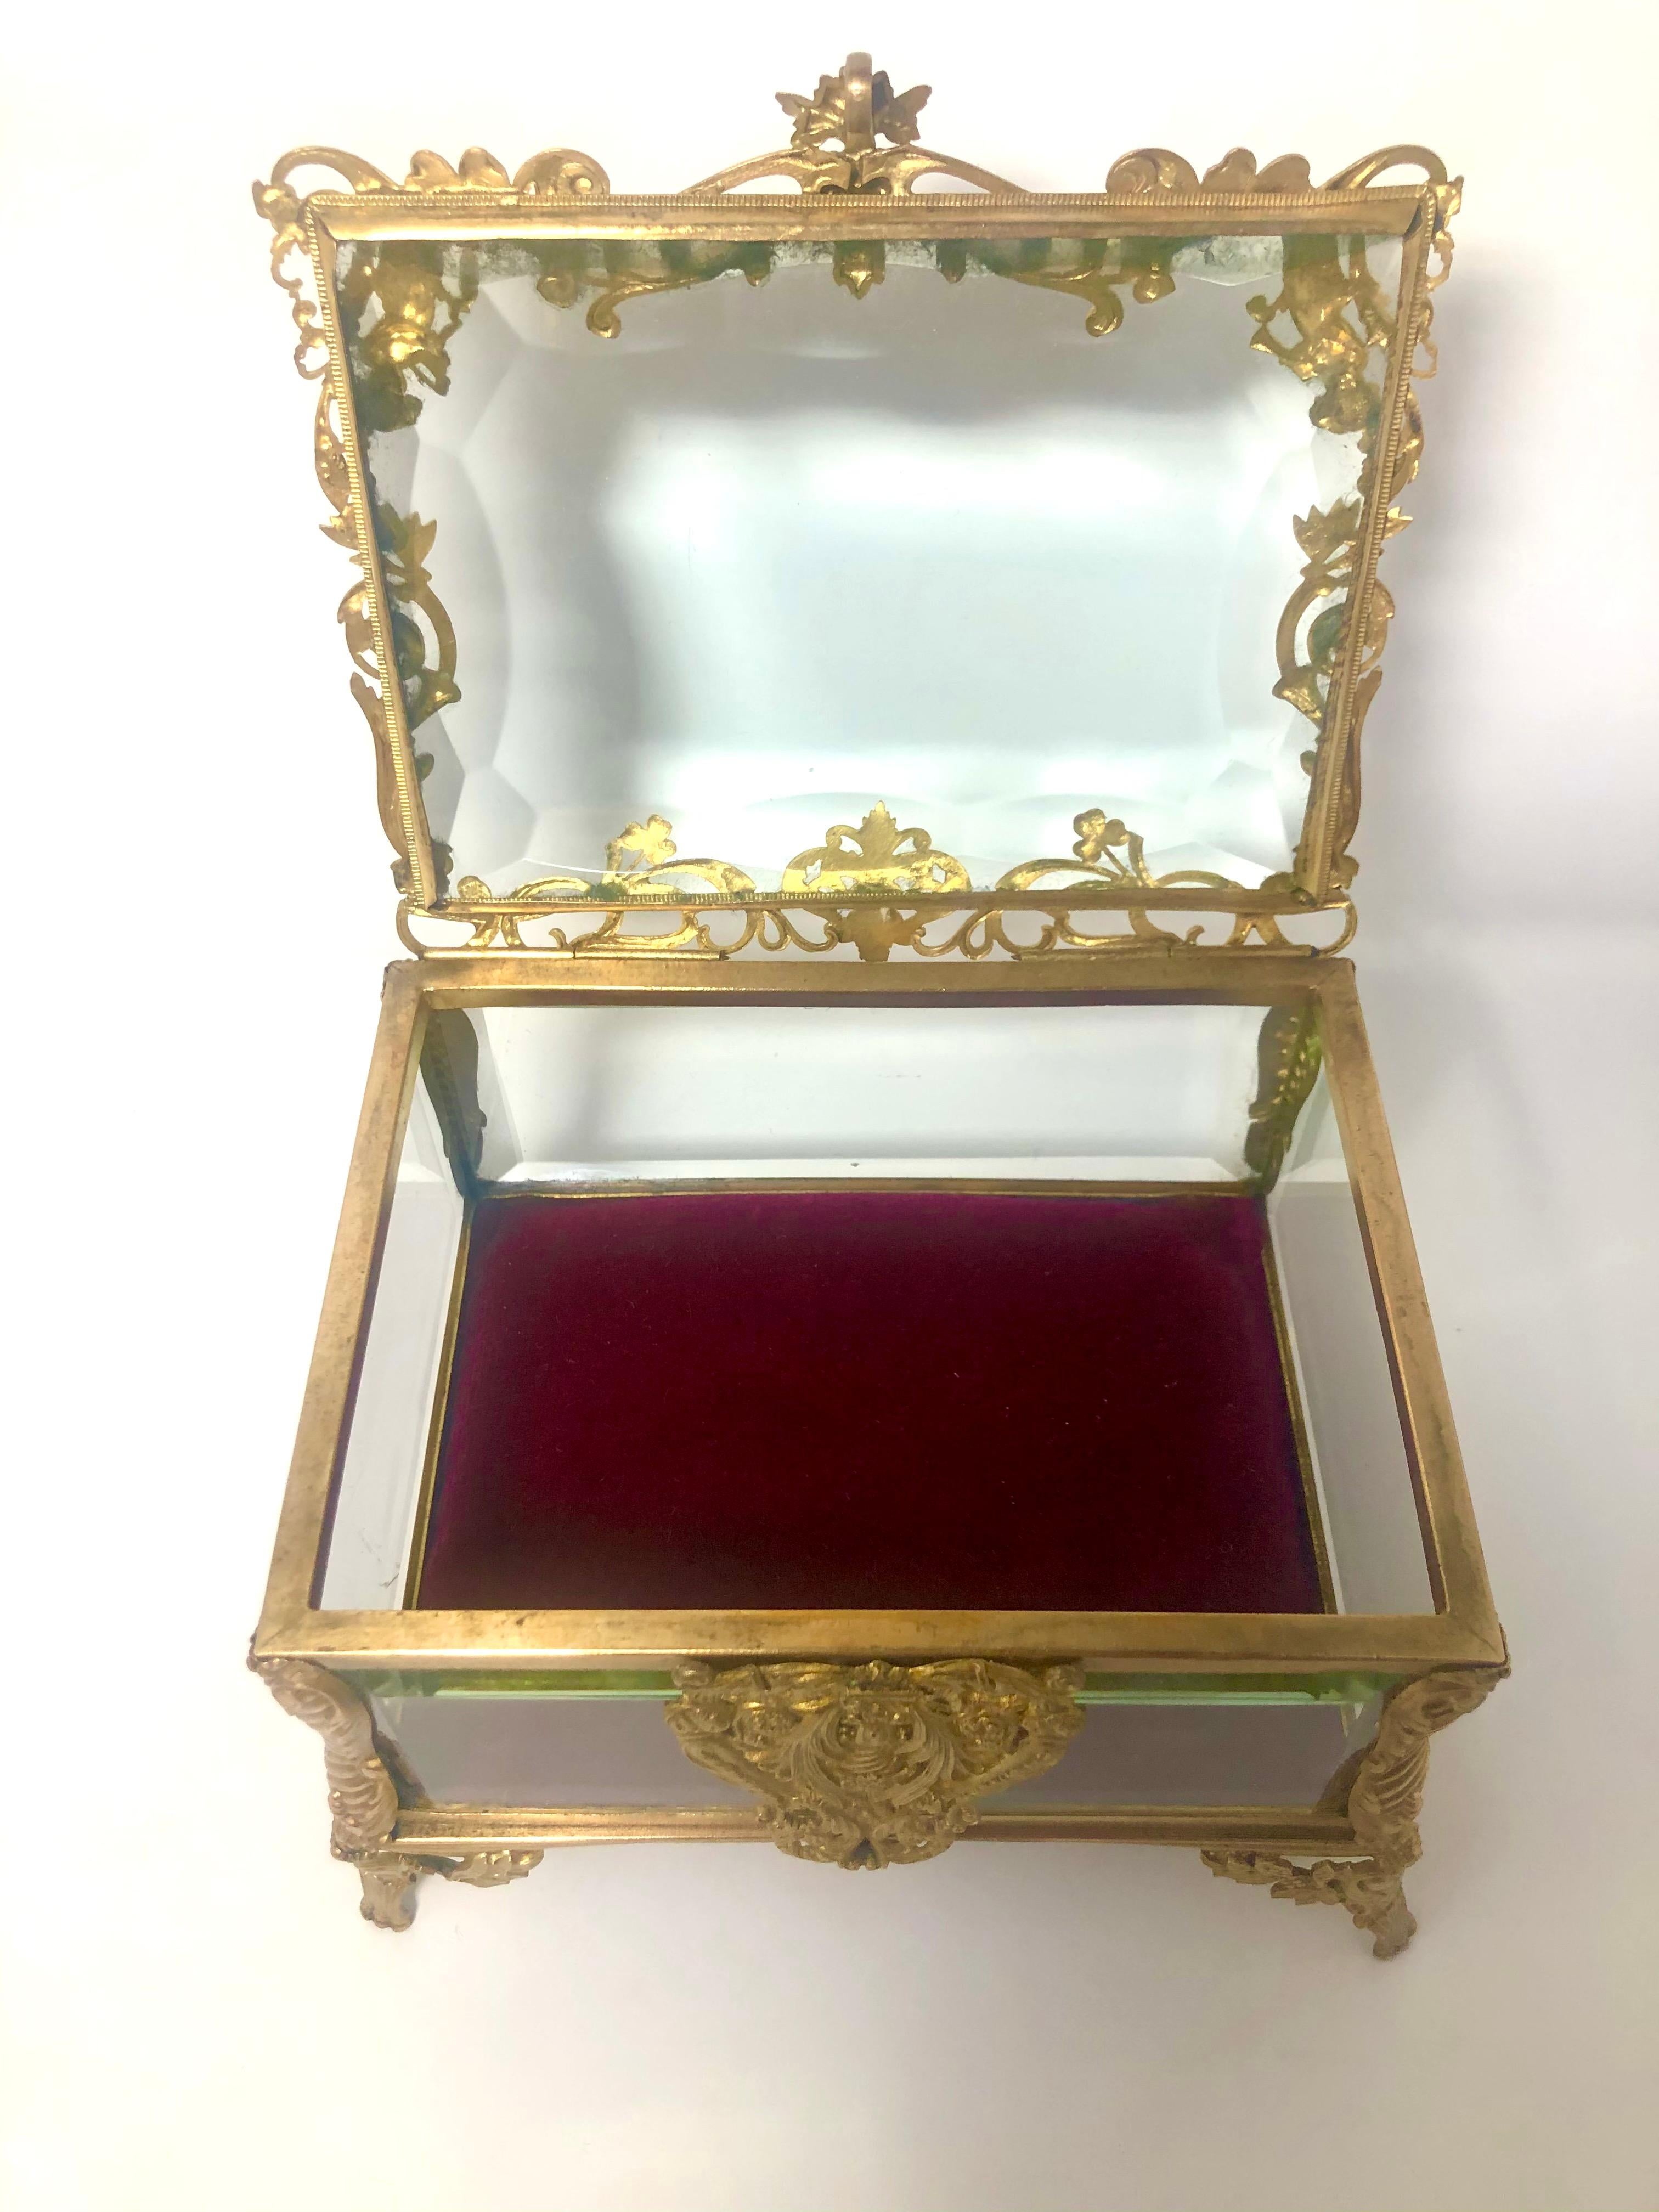 Antique French Art Nouveau gold bronze and crystal footed jewel box, Circa 1900.